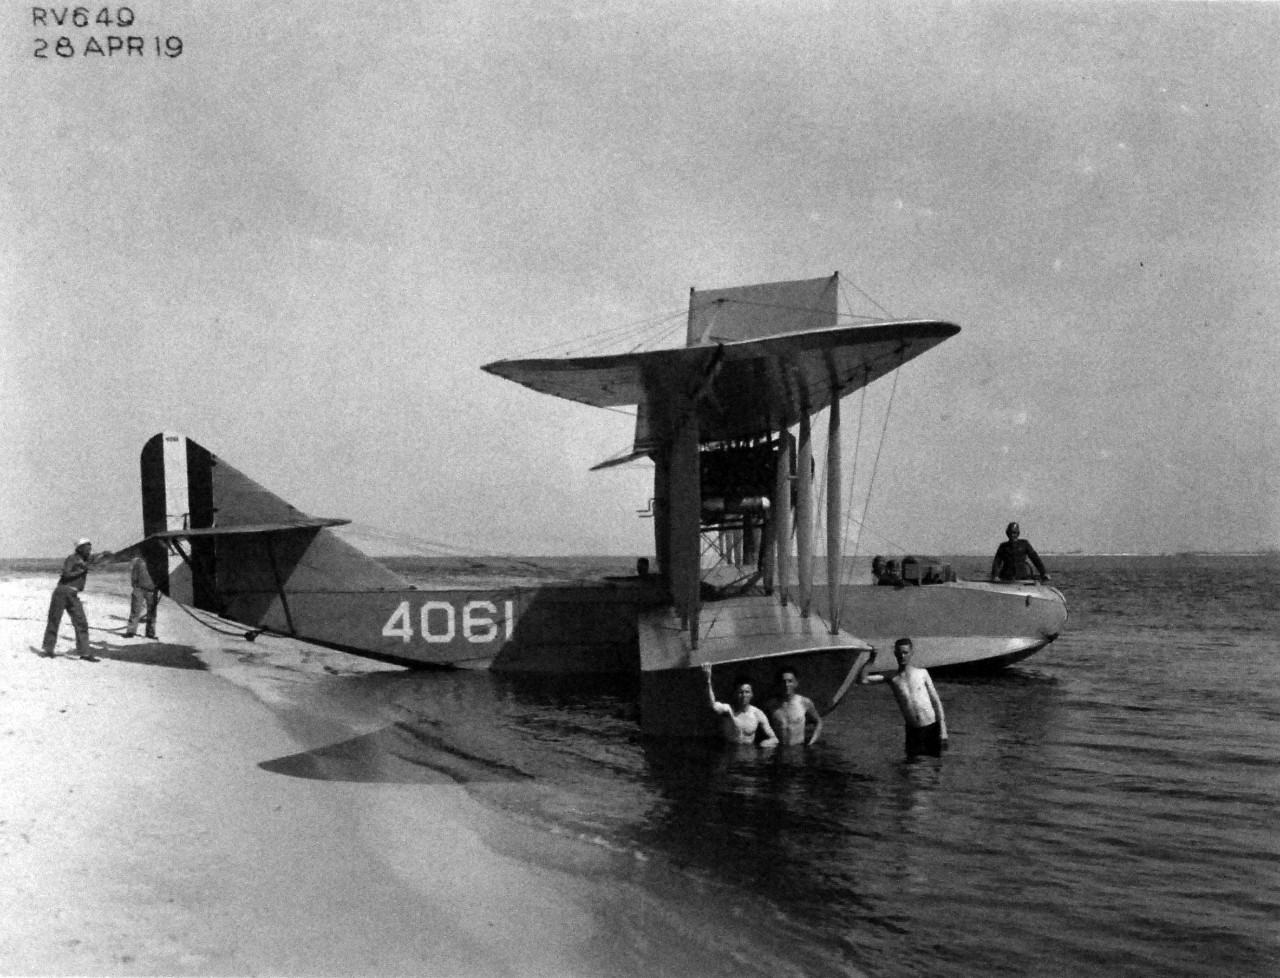 80-G-1027:    H-16 (Bu# 4061), 28 April 1919.   Official U.S. Navy Photograph, now in the collections of the National Archives .    (2014/05/29).